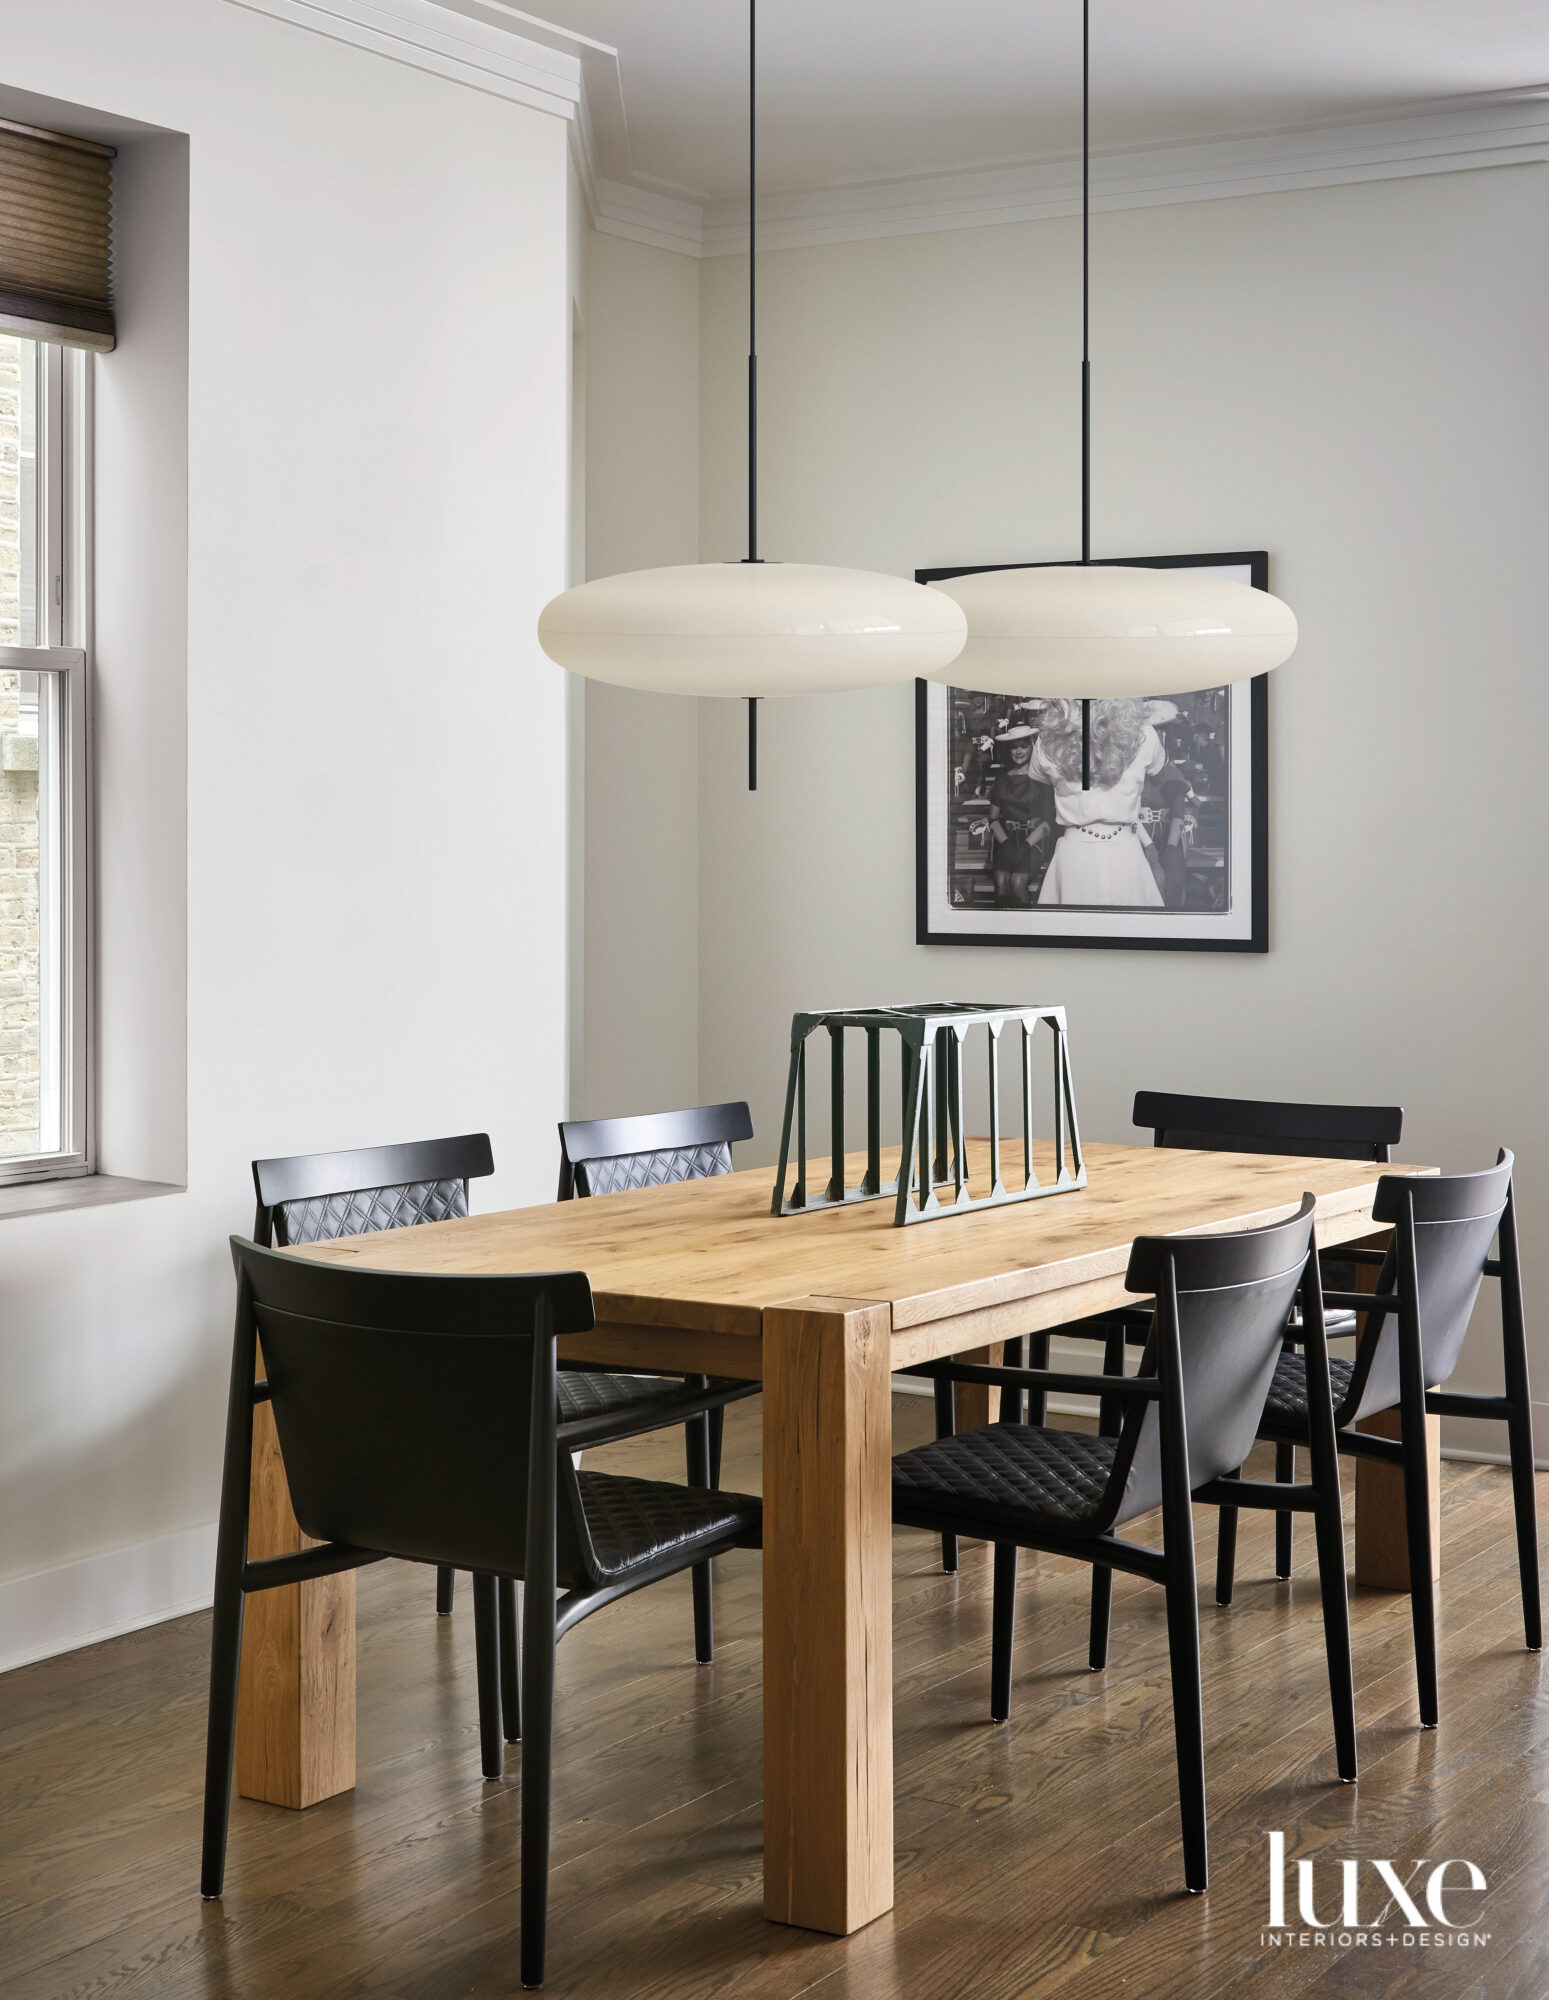 Two pendent lamps hang over a wood dining table surrounded by black chairs.